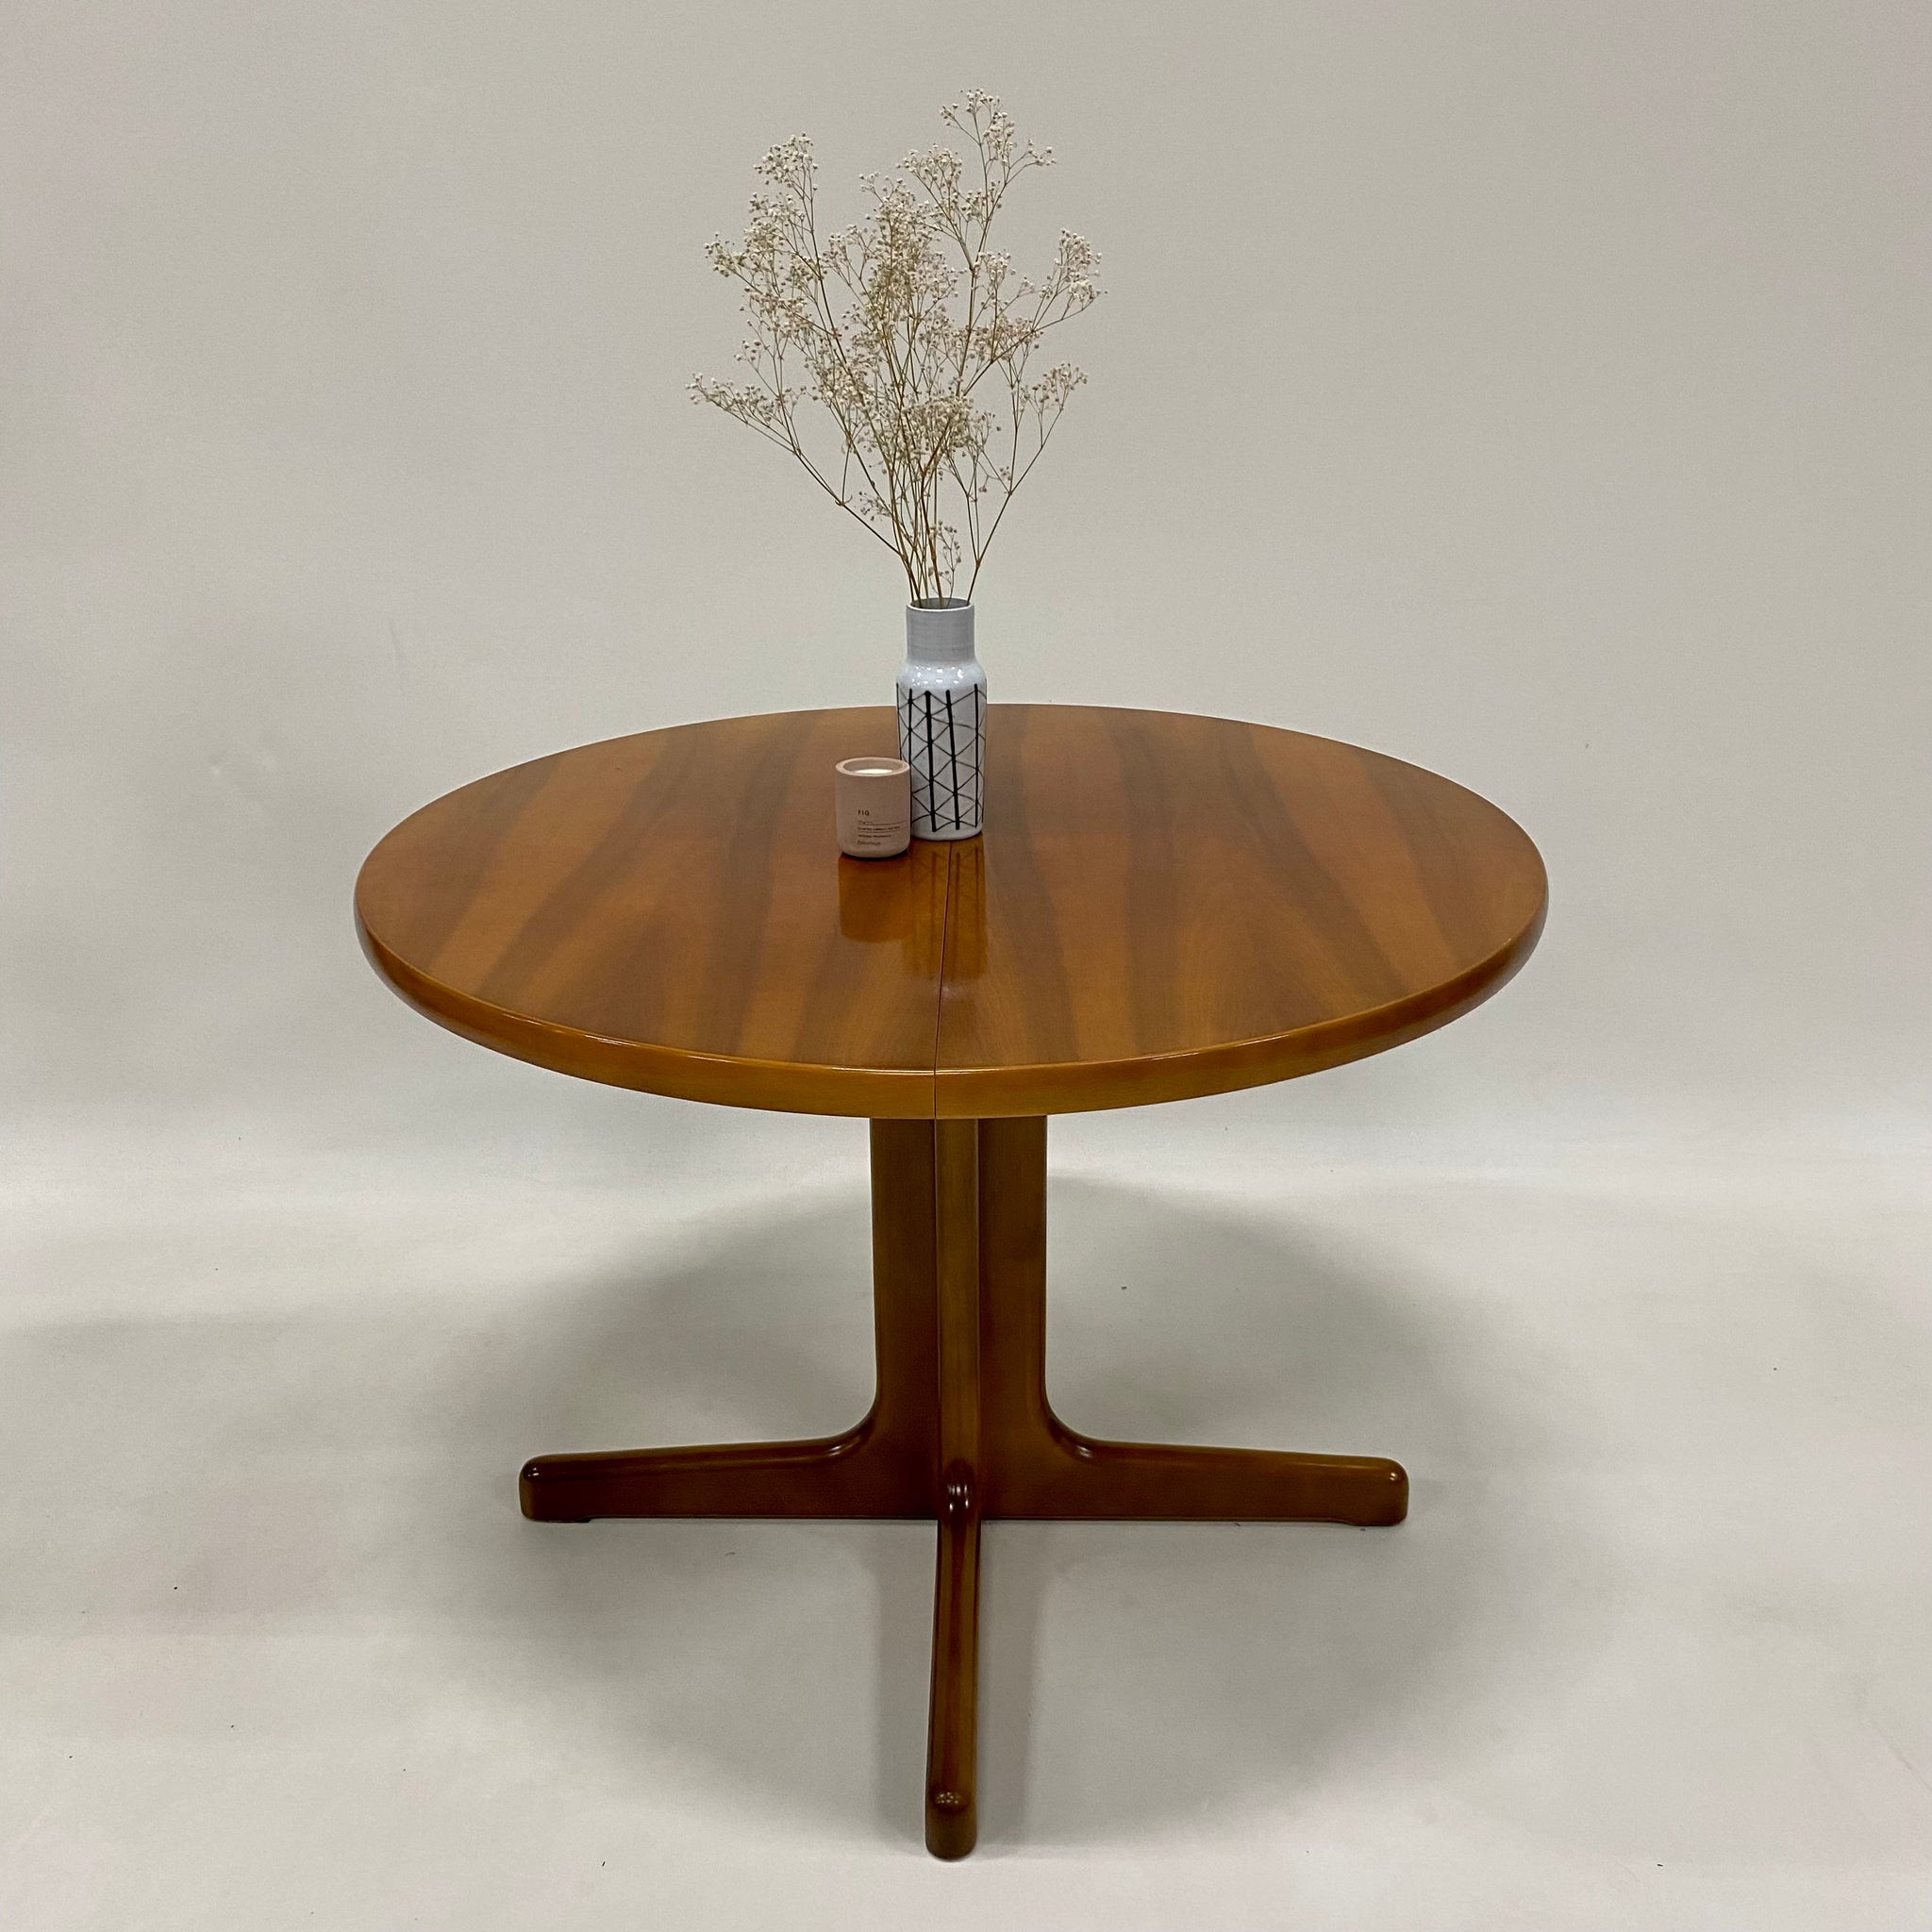 Teak Extendable Dining Table for Lübke Germany 1970 – FOUND ICONS